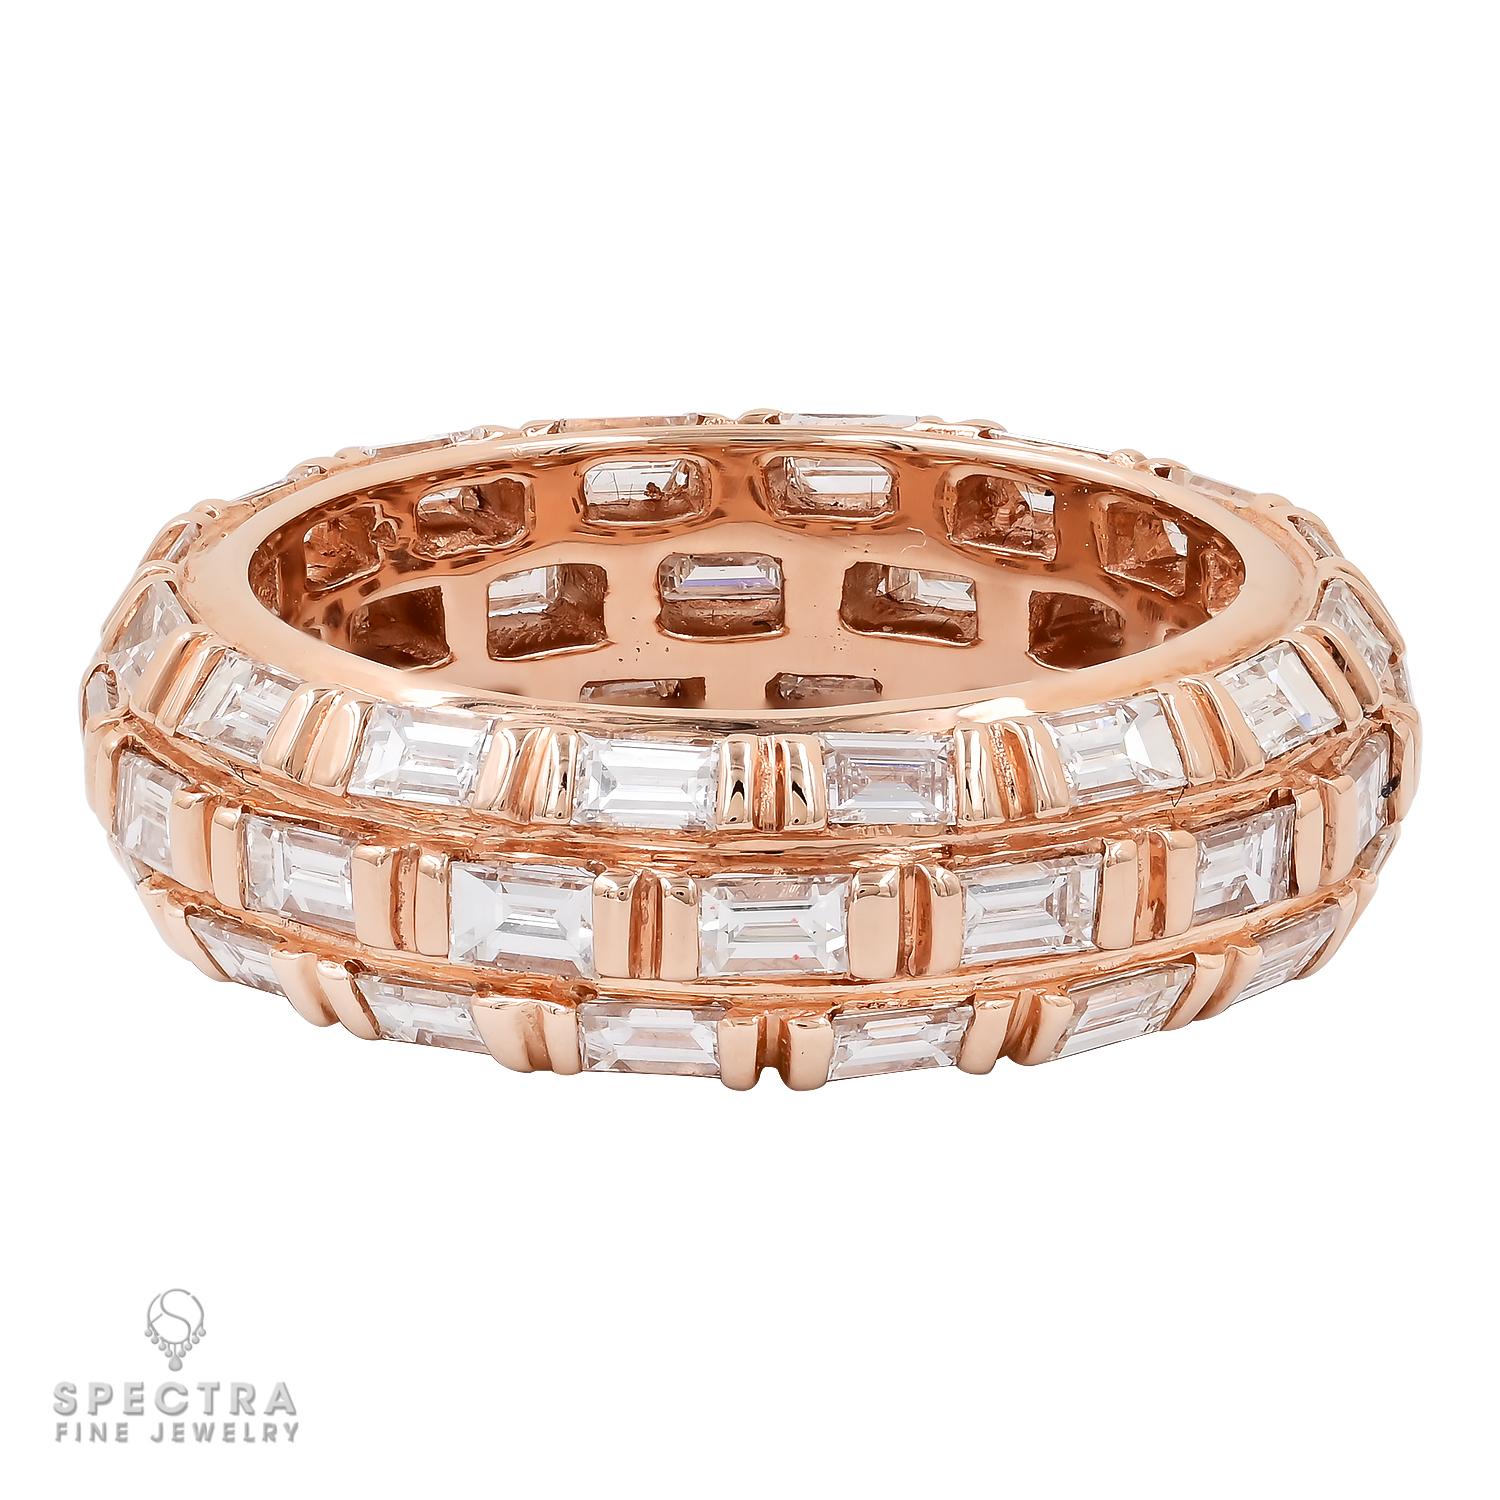 Introducing an exquisite symbol of eternal love: the Diamond Rose Gold Wedding Band. Crafted with precision, this stunning piece is adorned with a total of 2.24 carats of emerald-cut diamonds, meticulously set in lustrous 18k rose gold. The diamonds